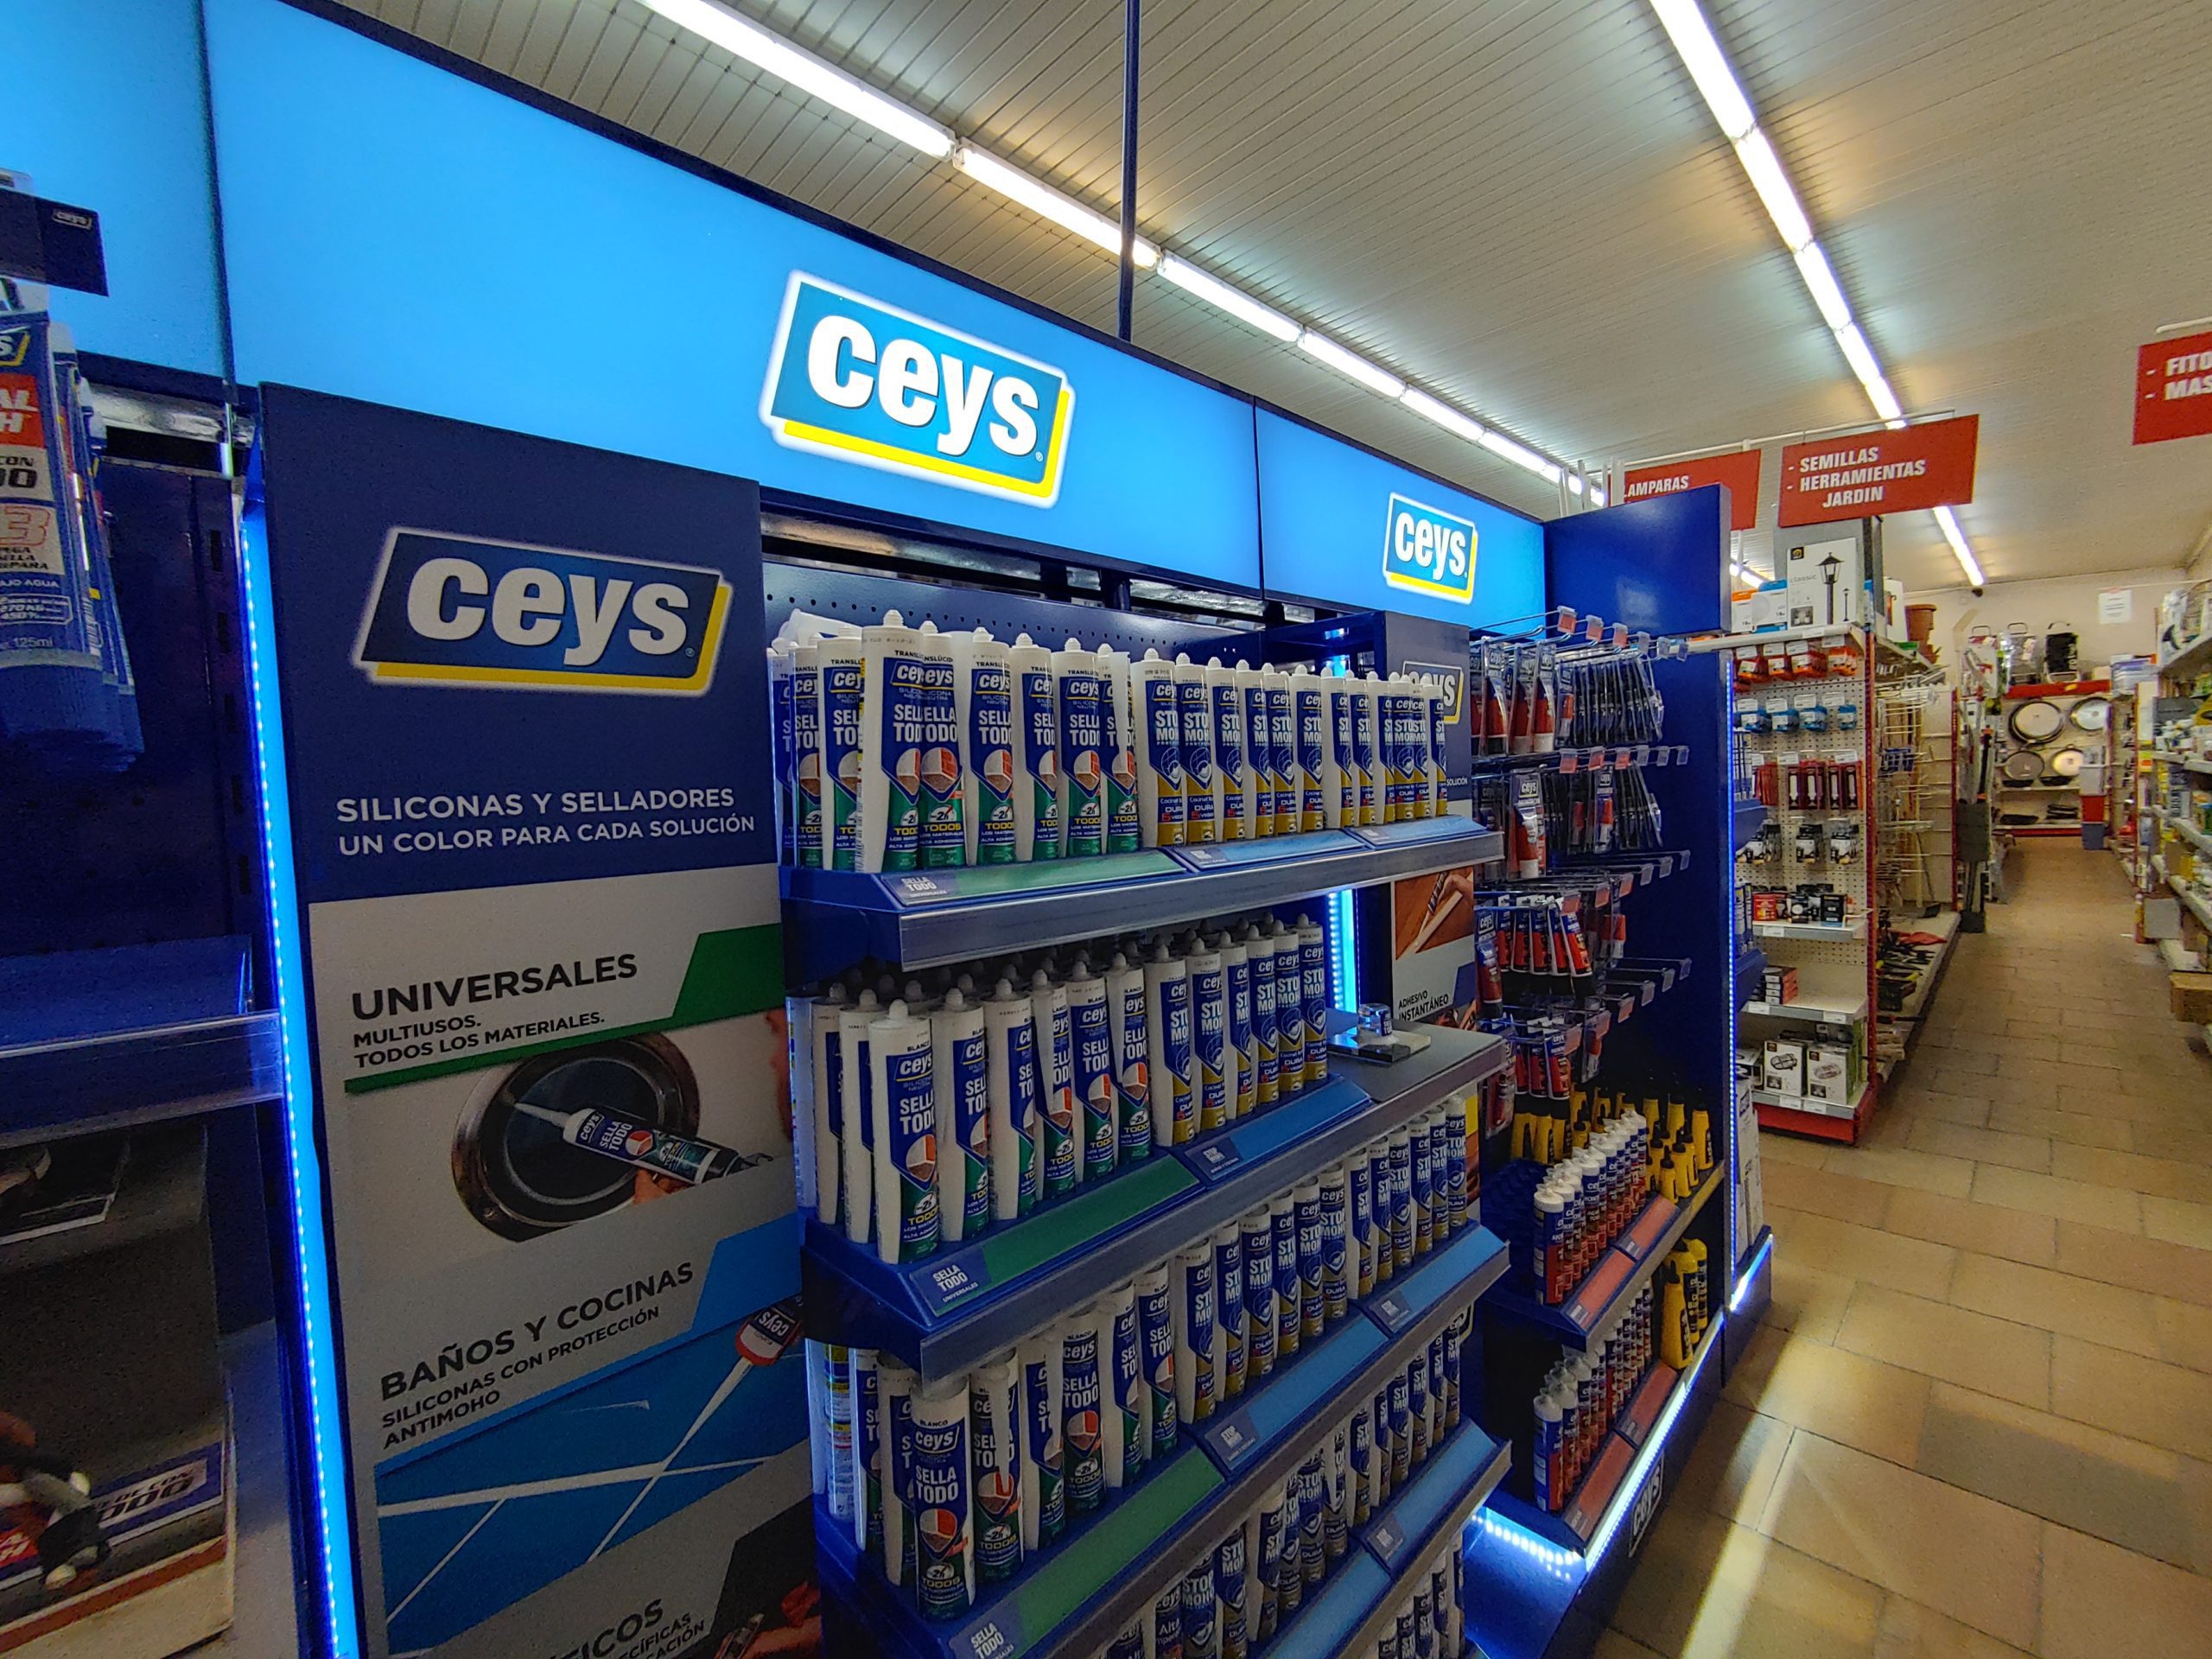 Ceys supermarket line. Actions at the point of sale